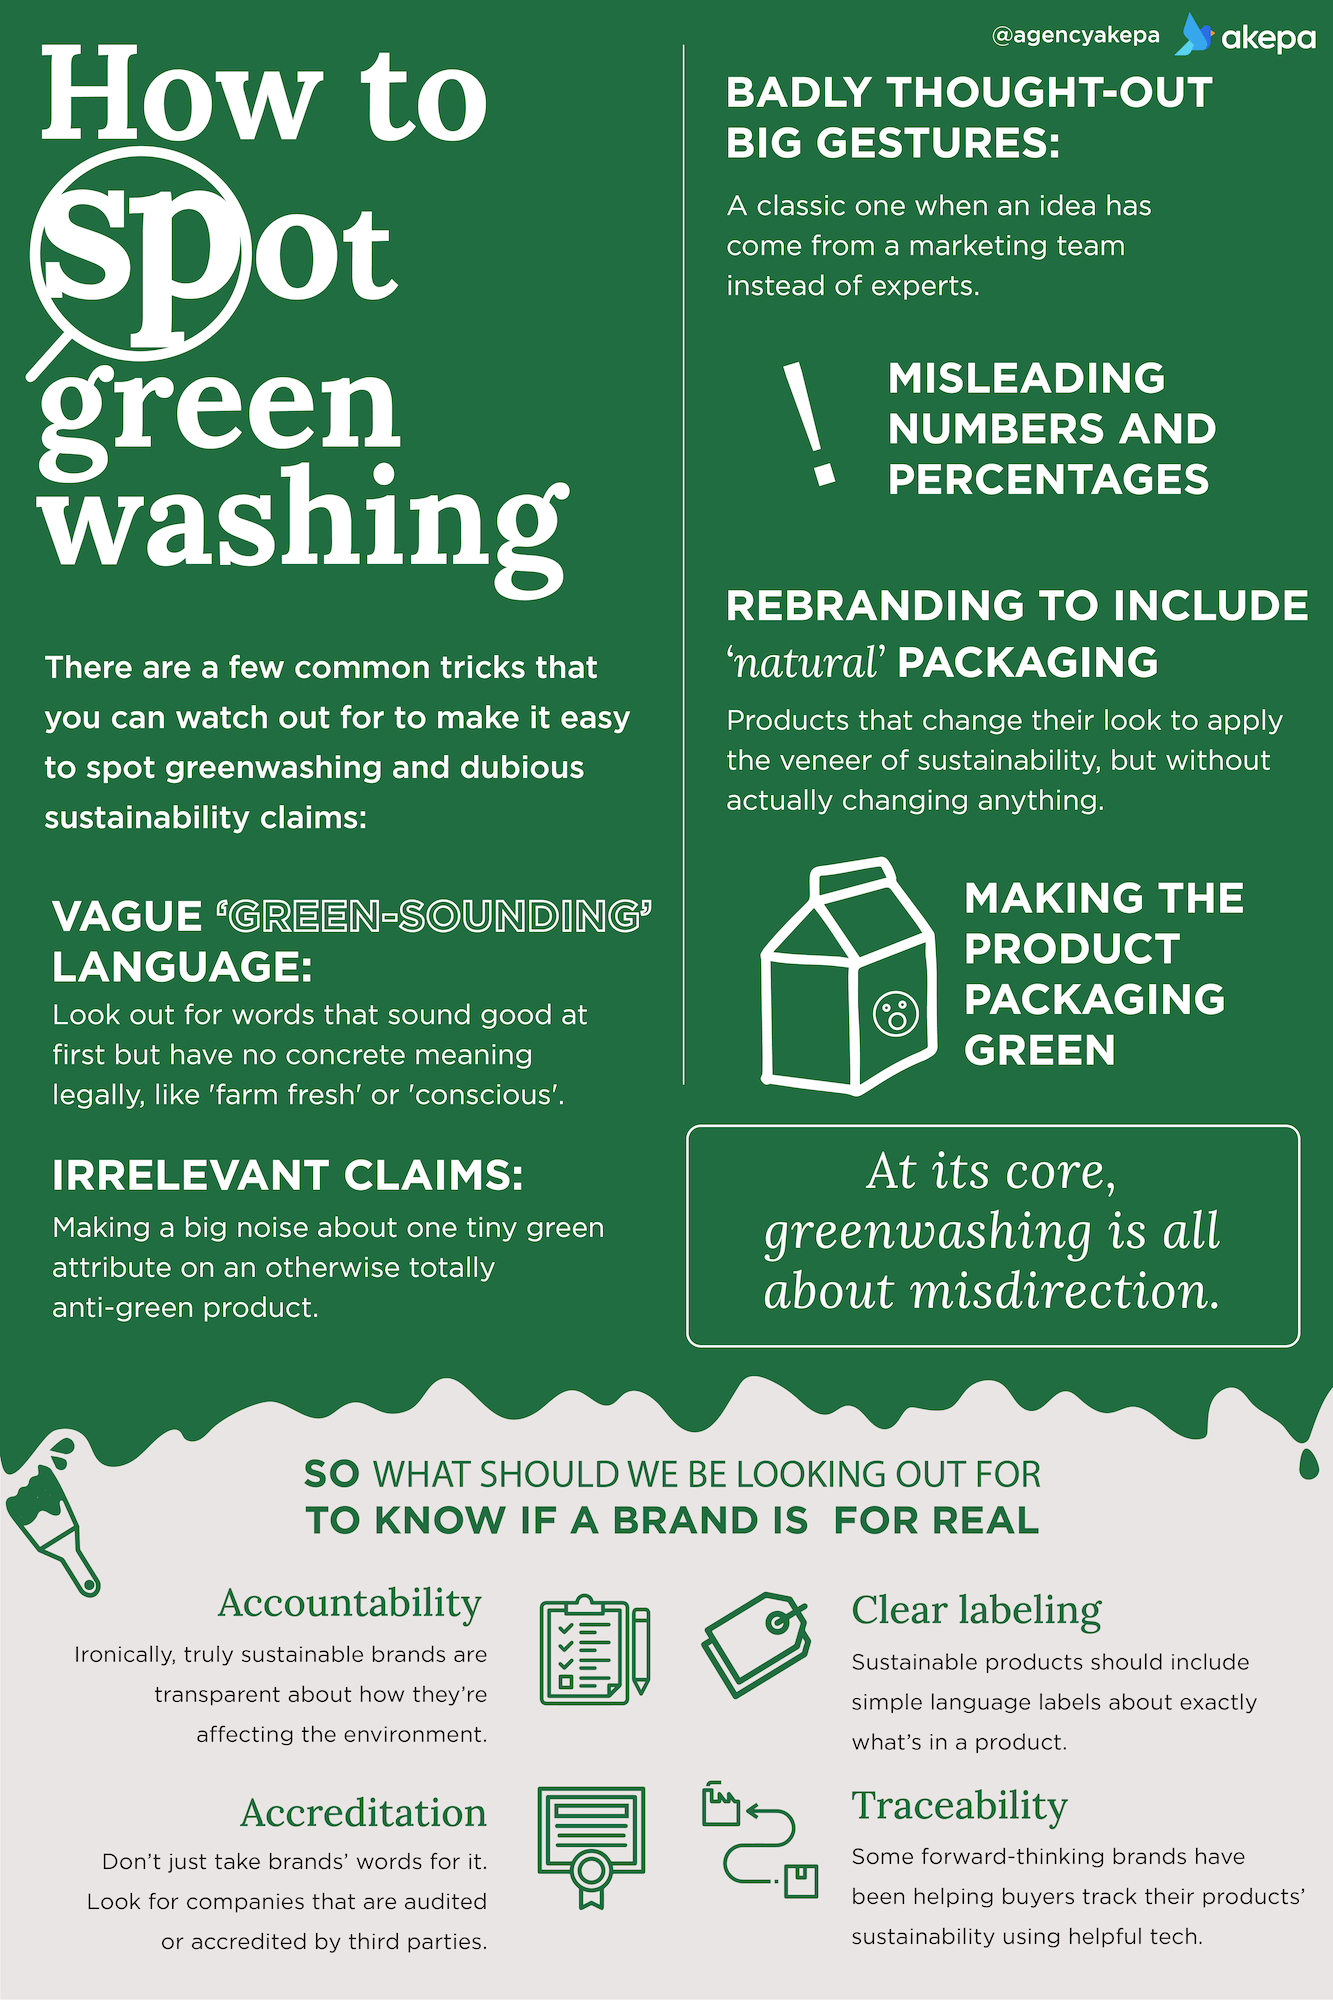 How to spot greenwashing infographic